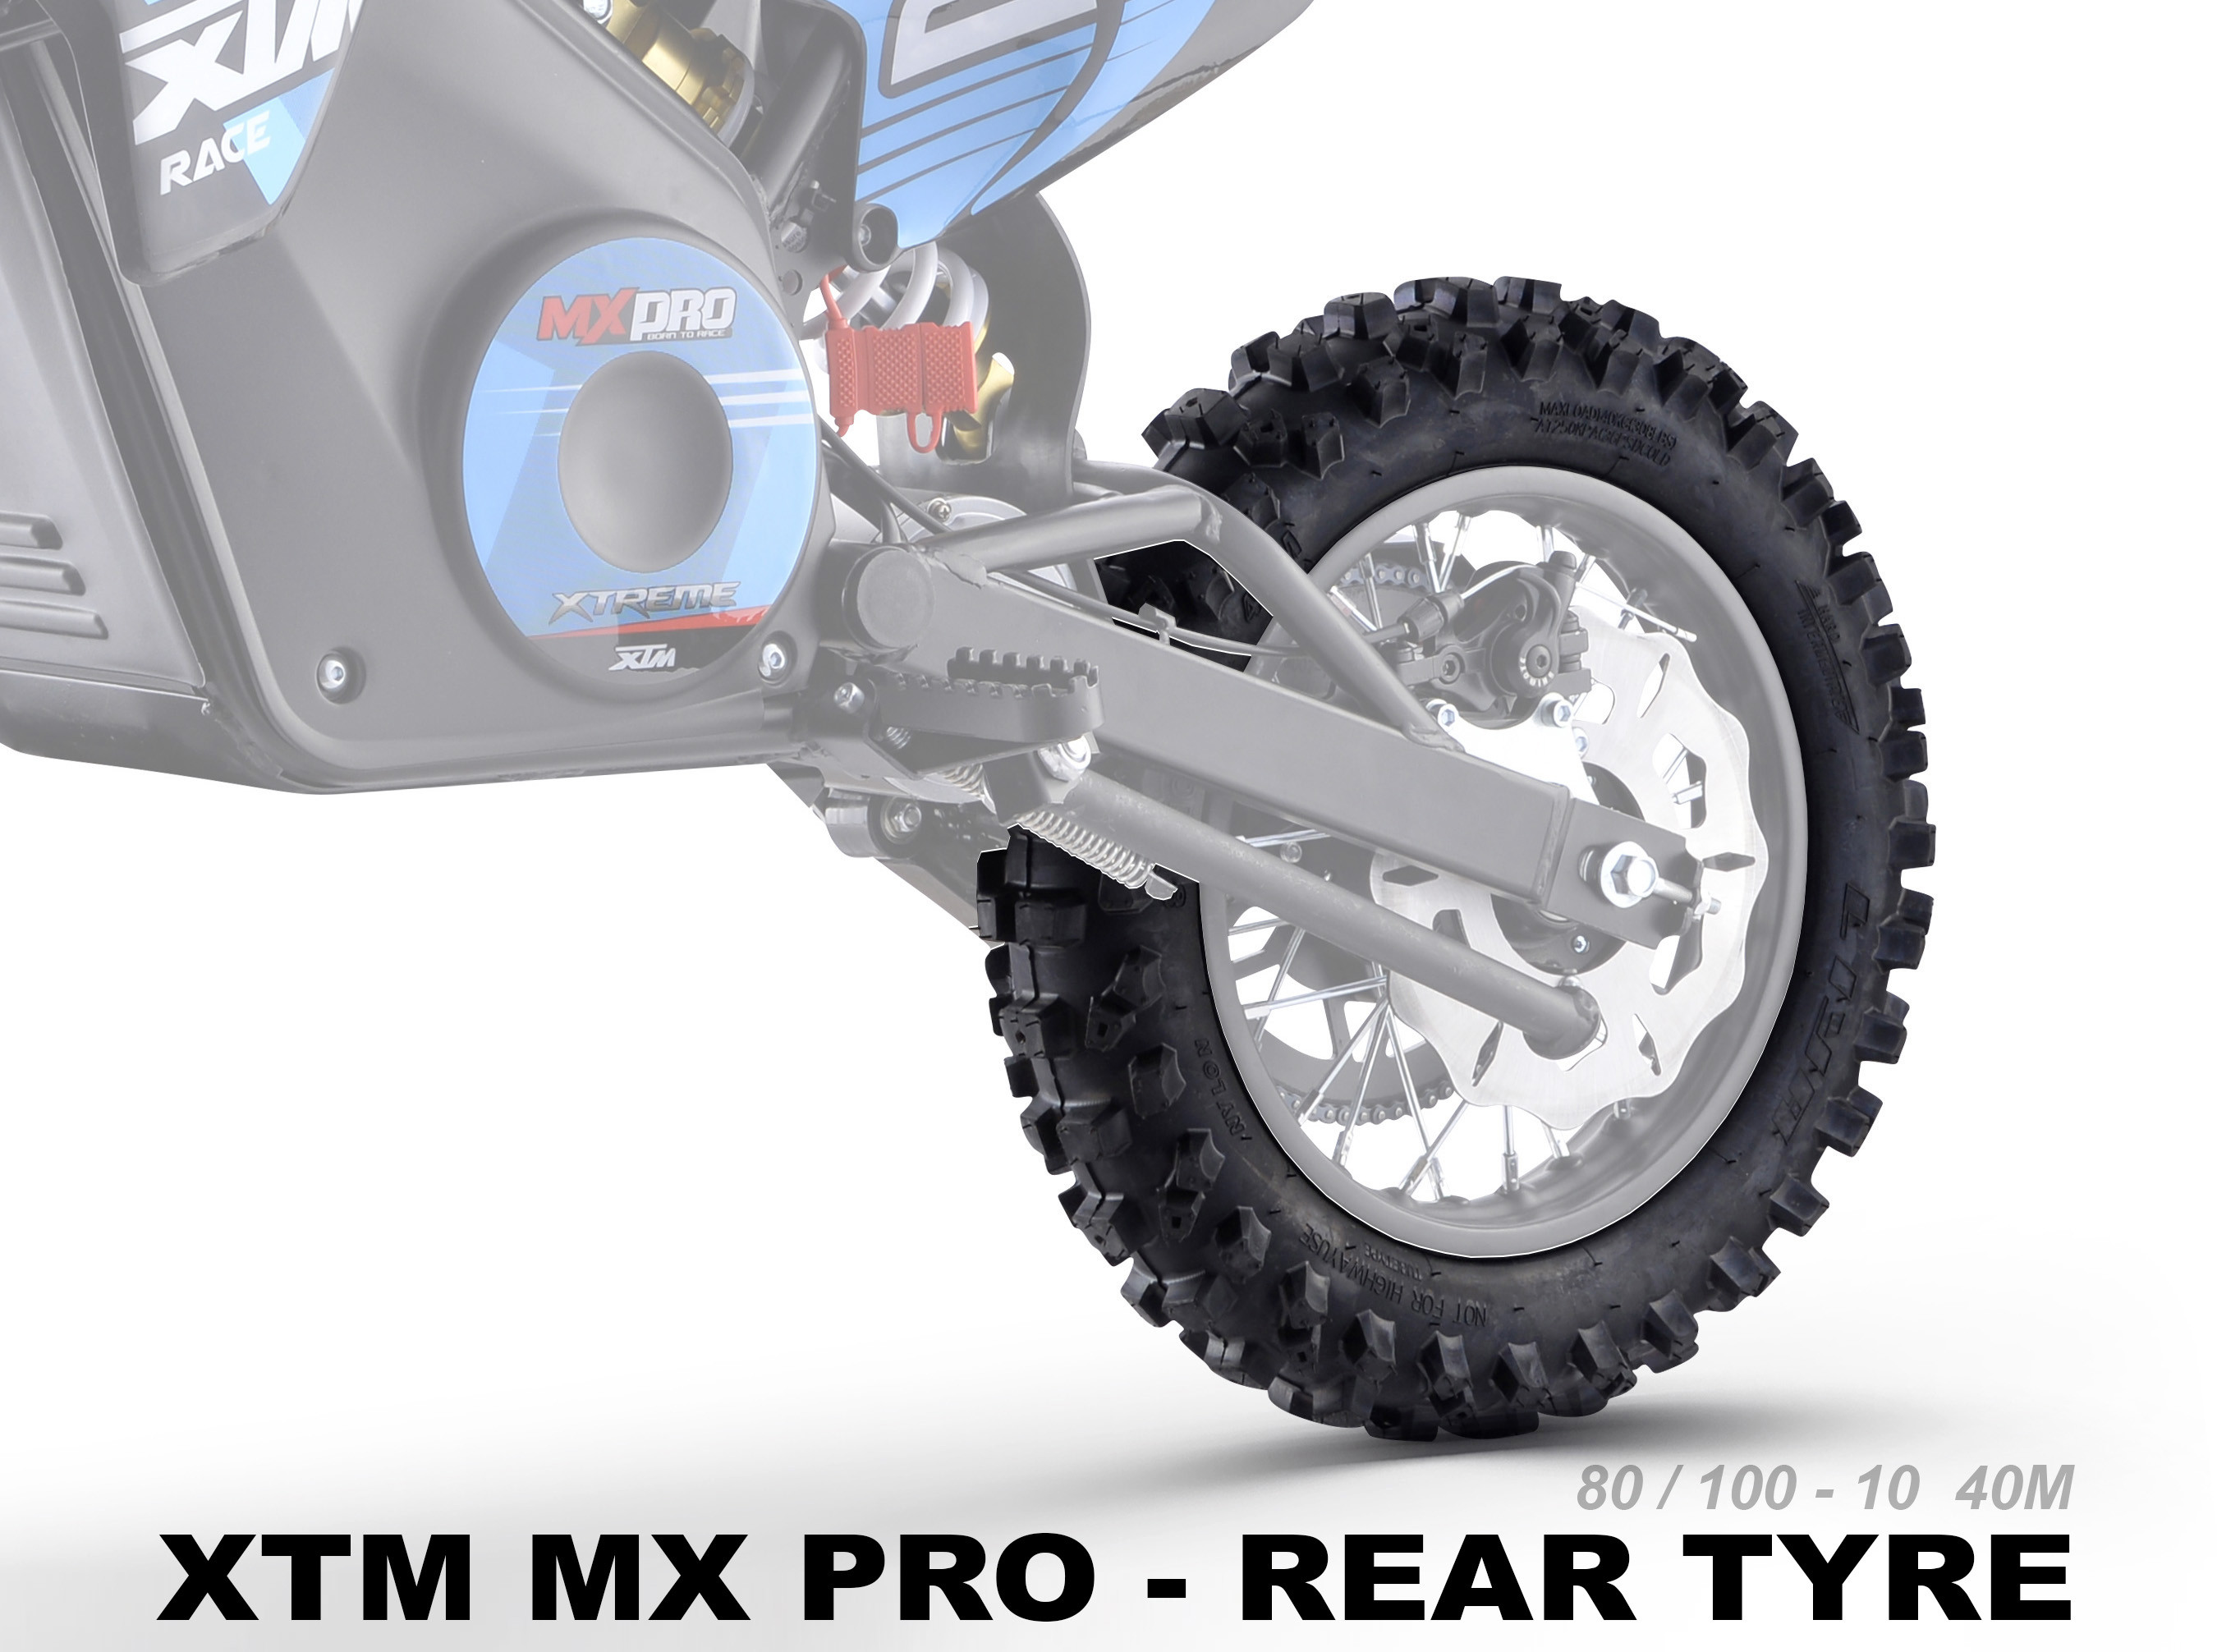 XTREME ELECTRIC XTM MX-PRO 36V REPLACEMENT REAR TYRE 80/100-10 40M